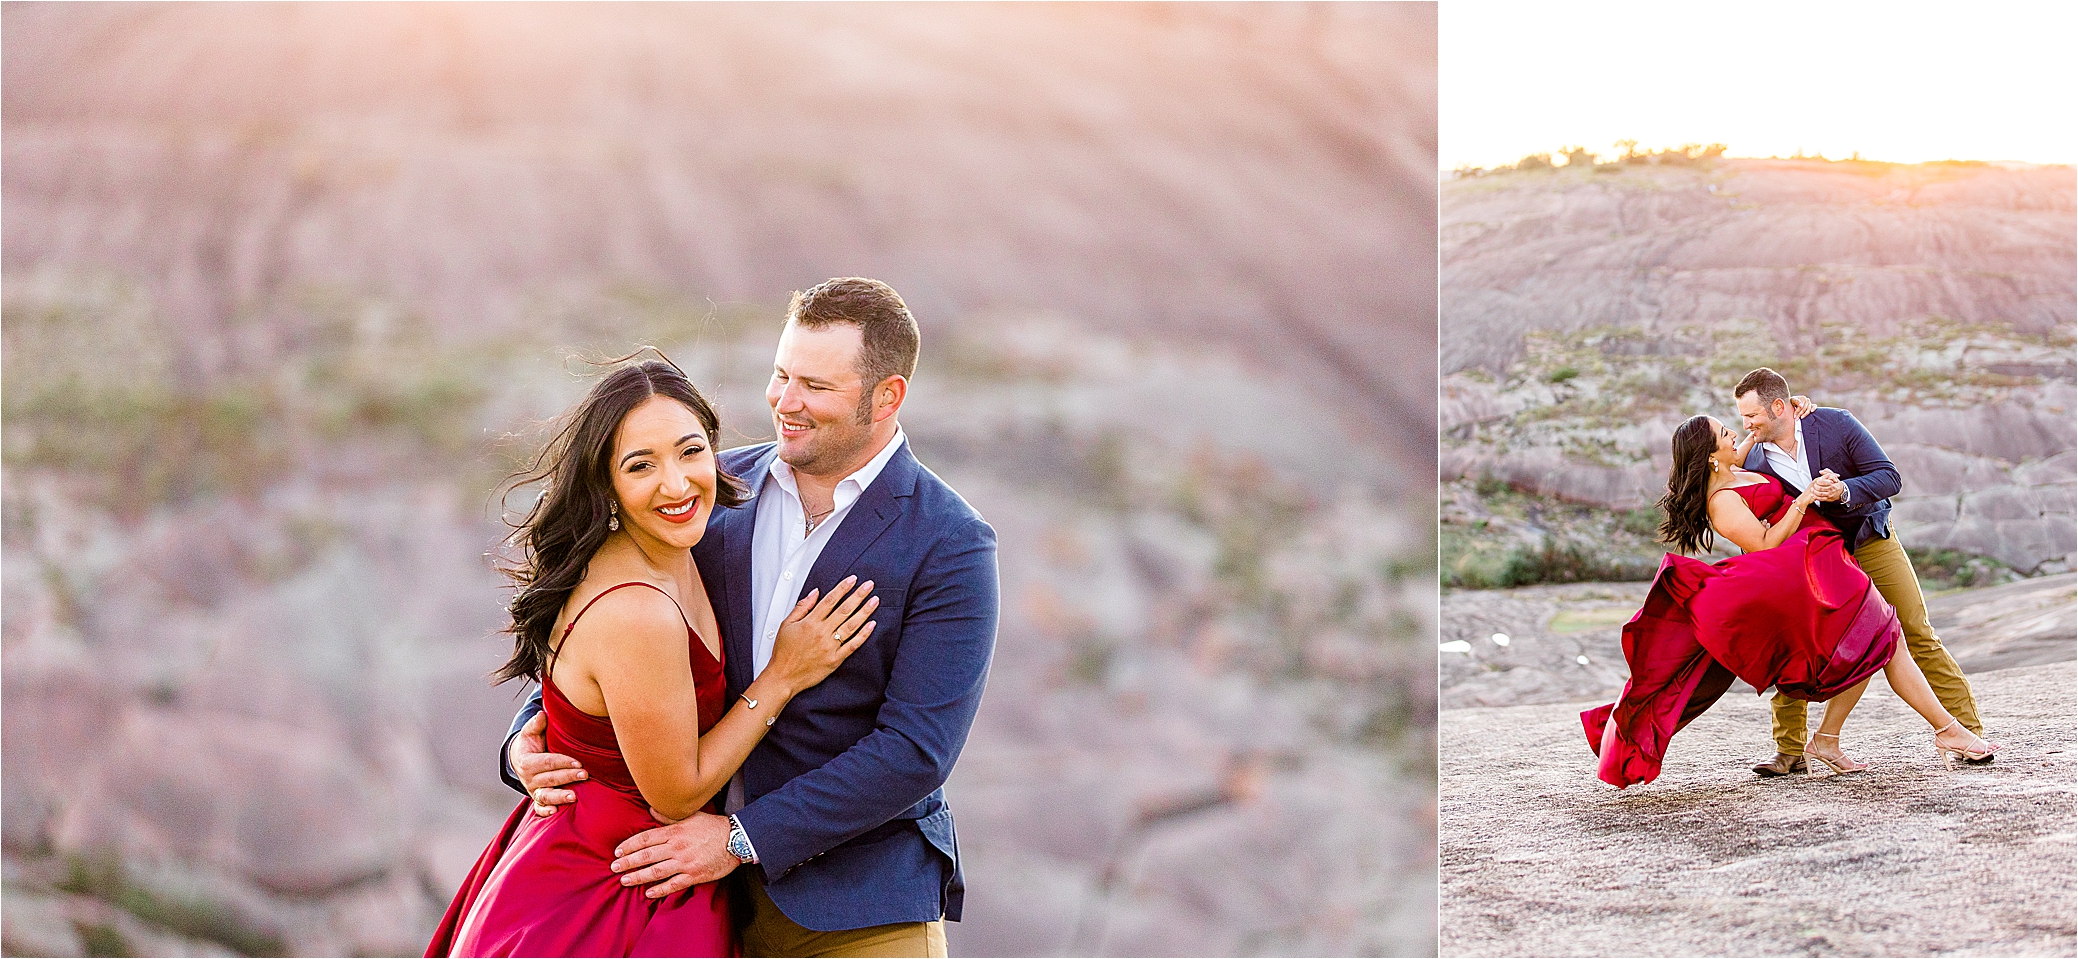 A couple laughs in front of the sunset during their Enchanted Rock Engagement Session with Hill Country Photographer Jillian Hogan 